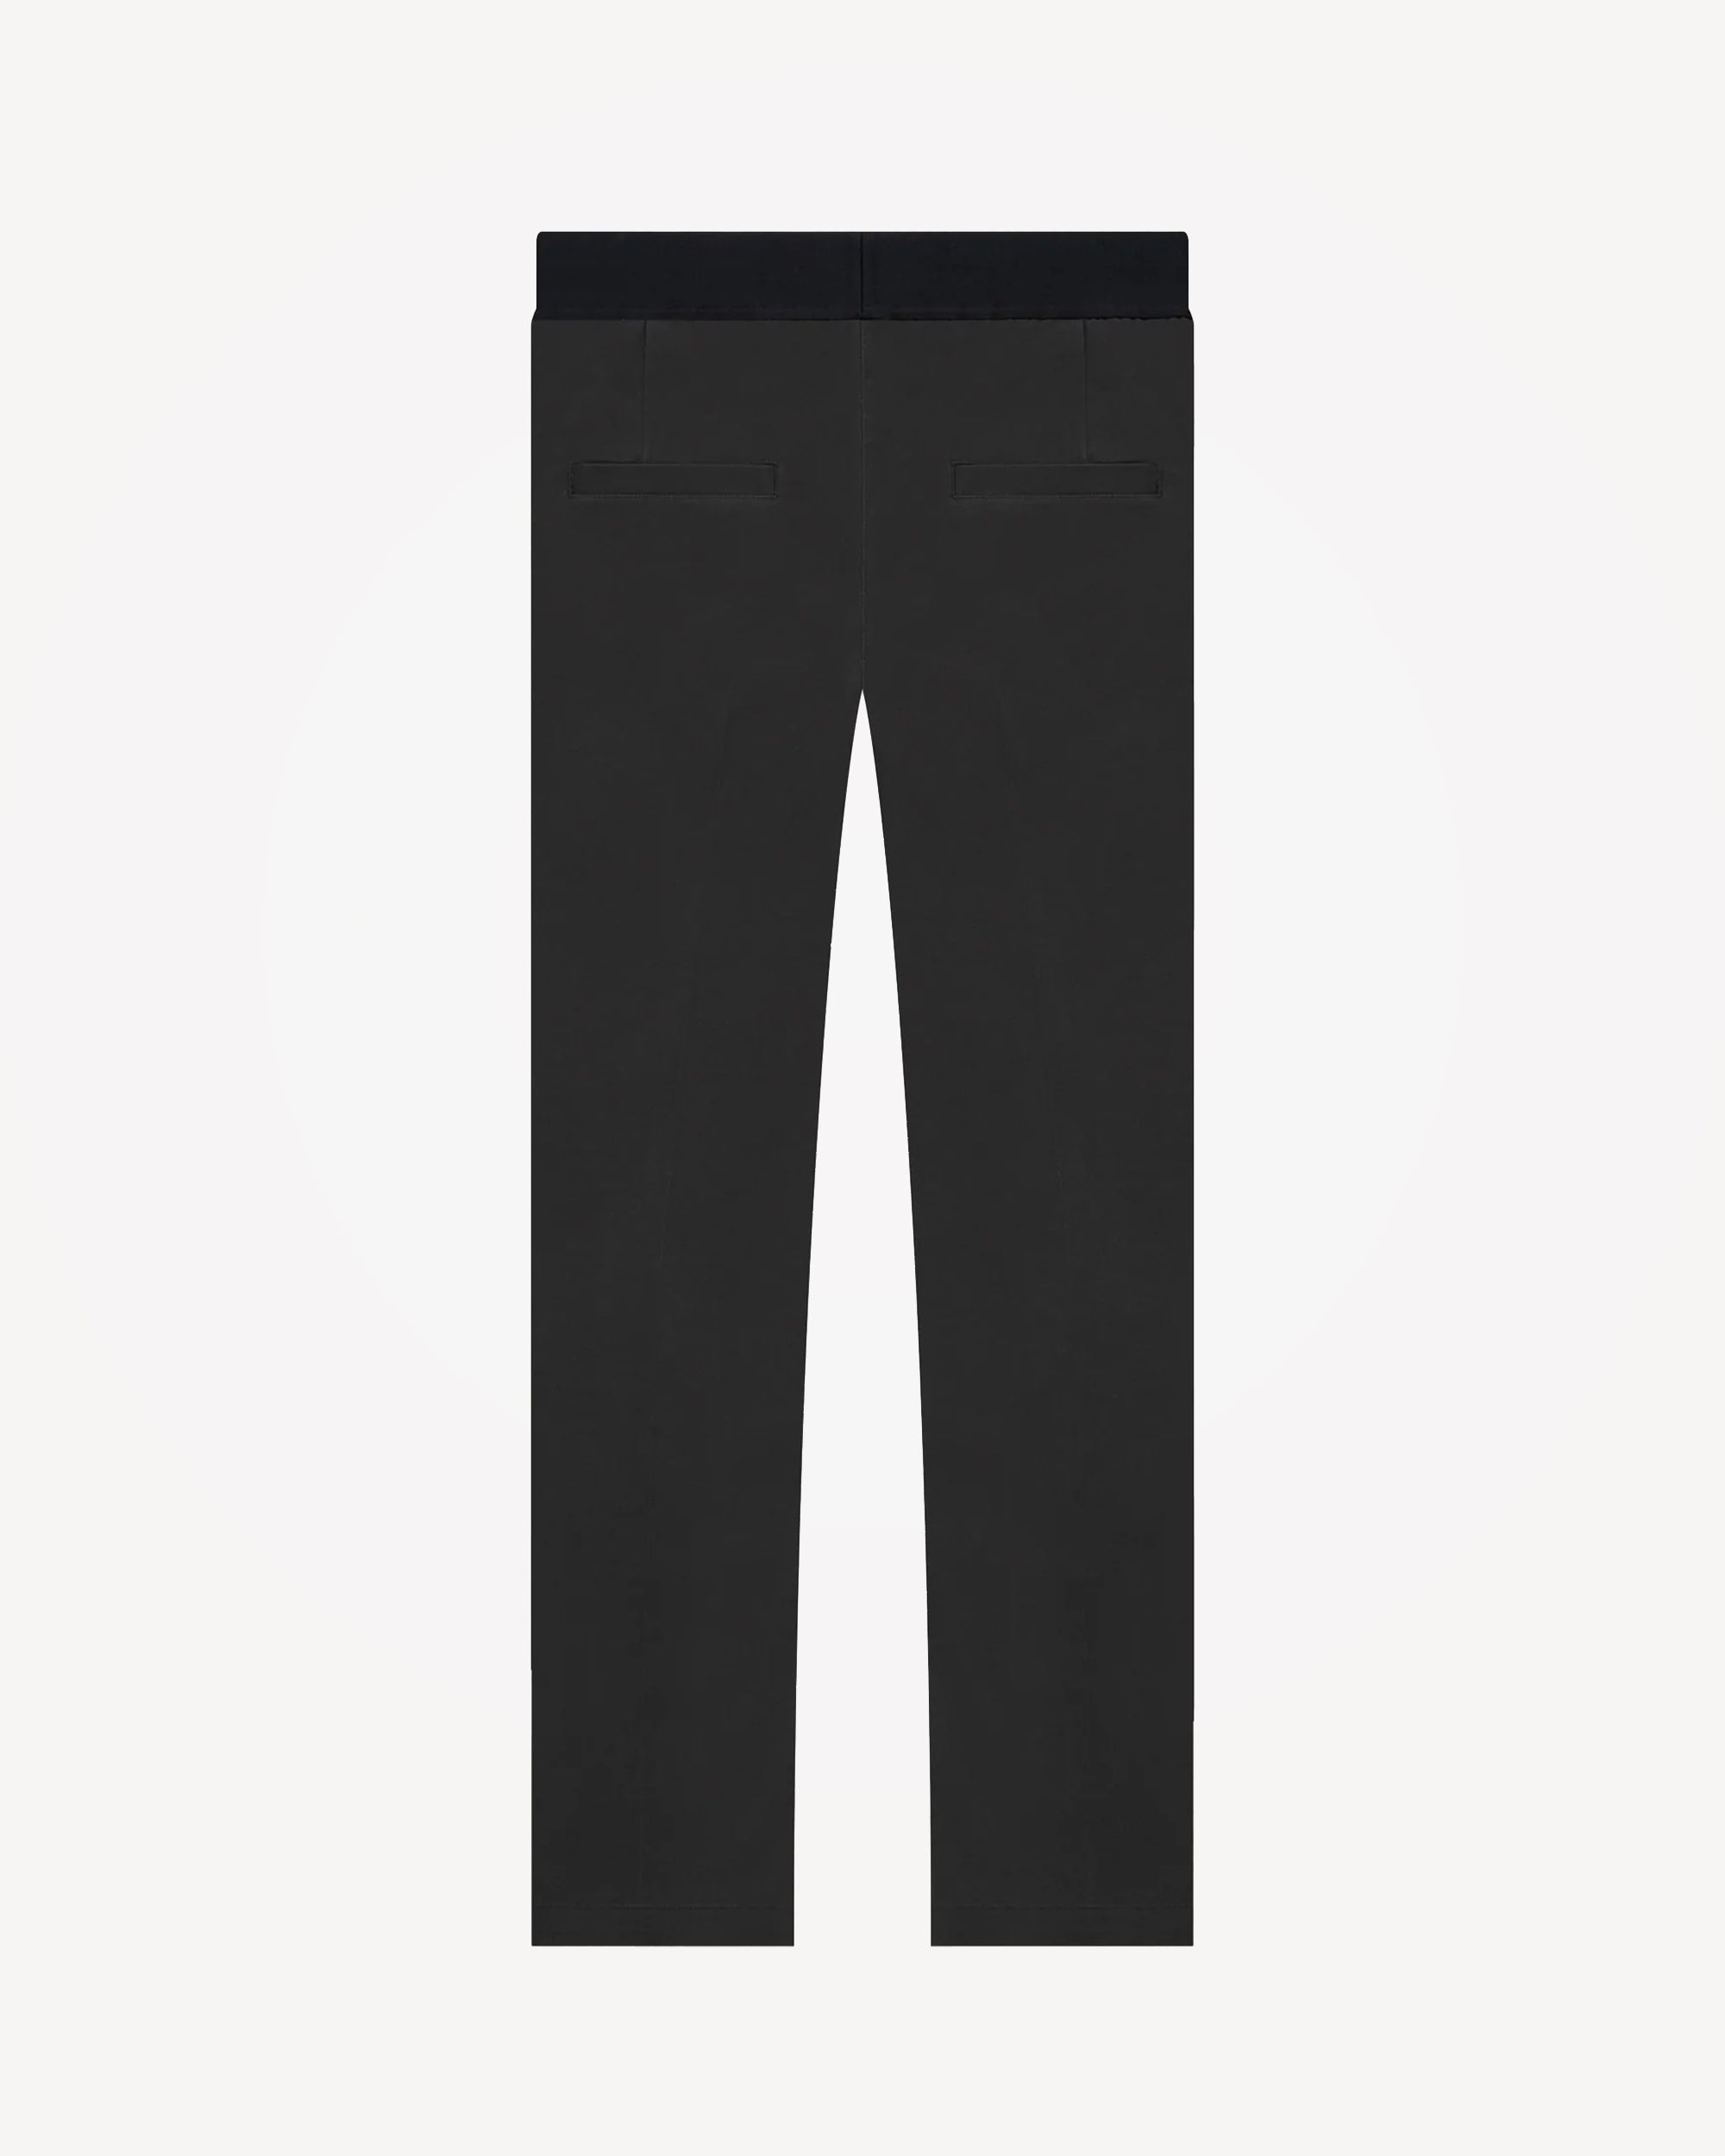 Women's Relaxed Trouser in Iron